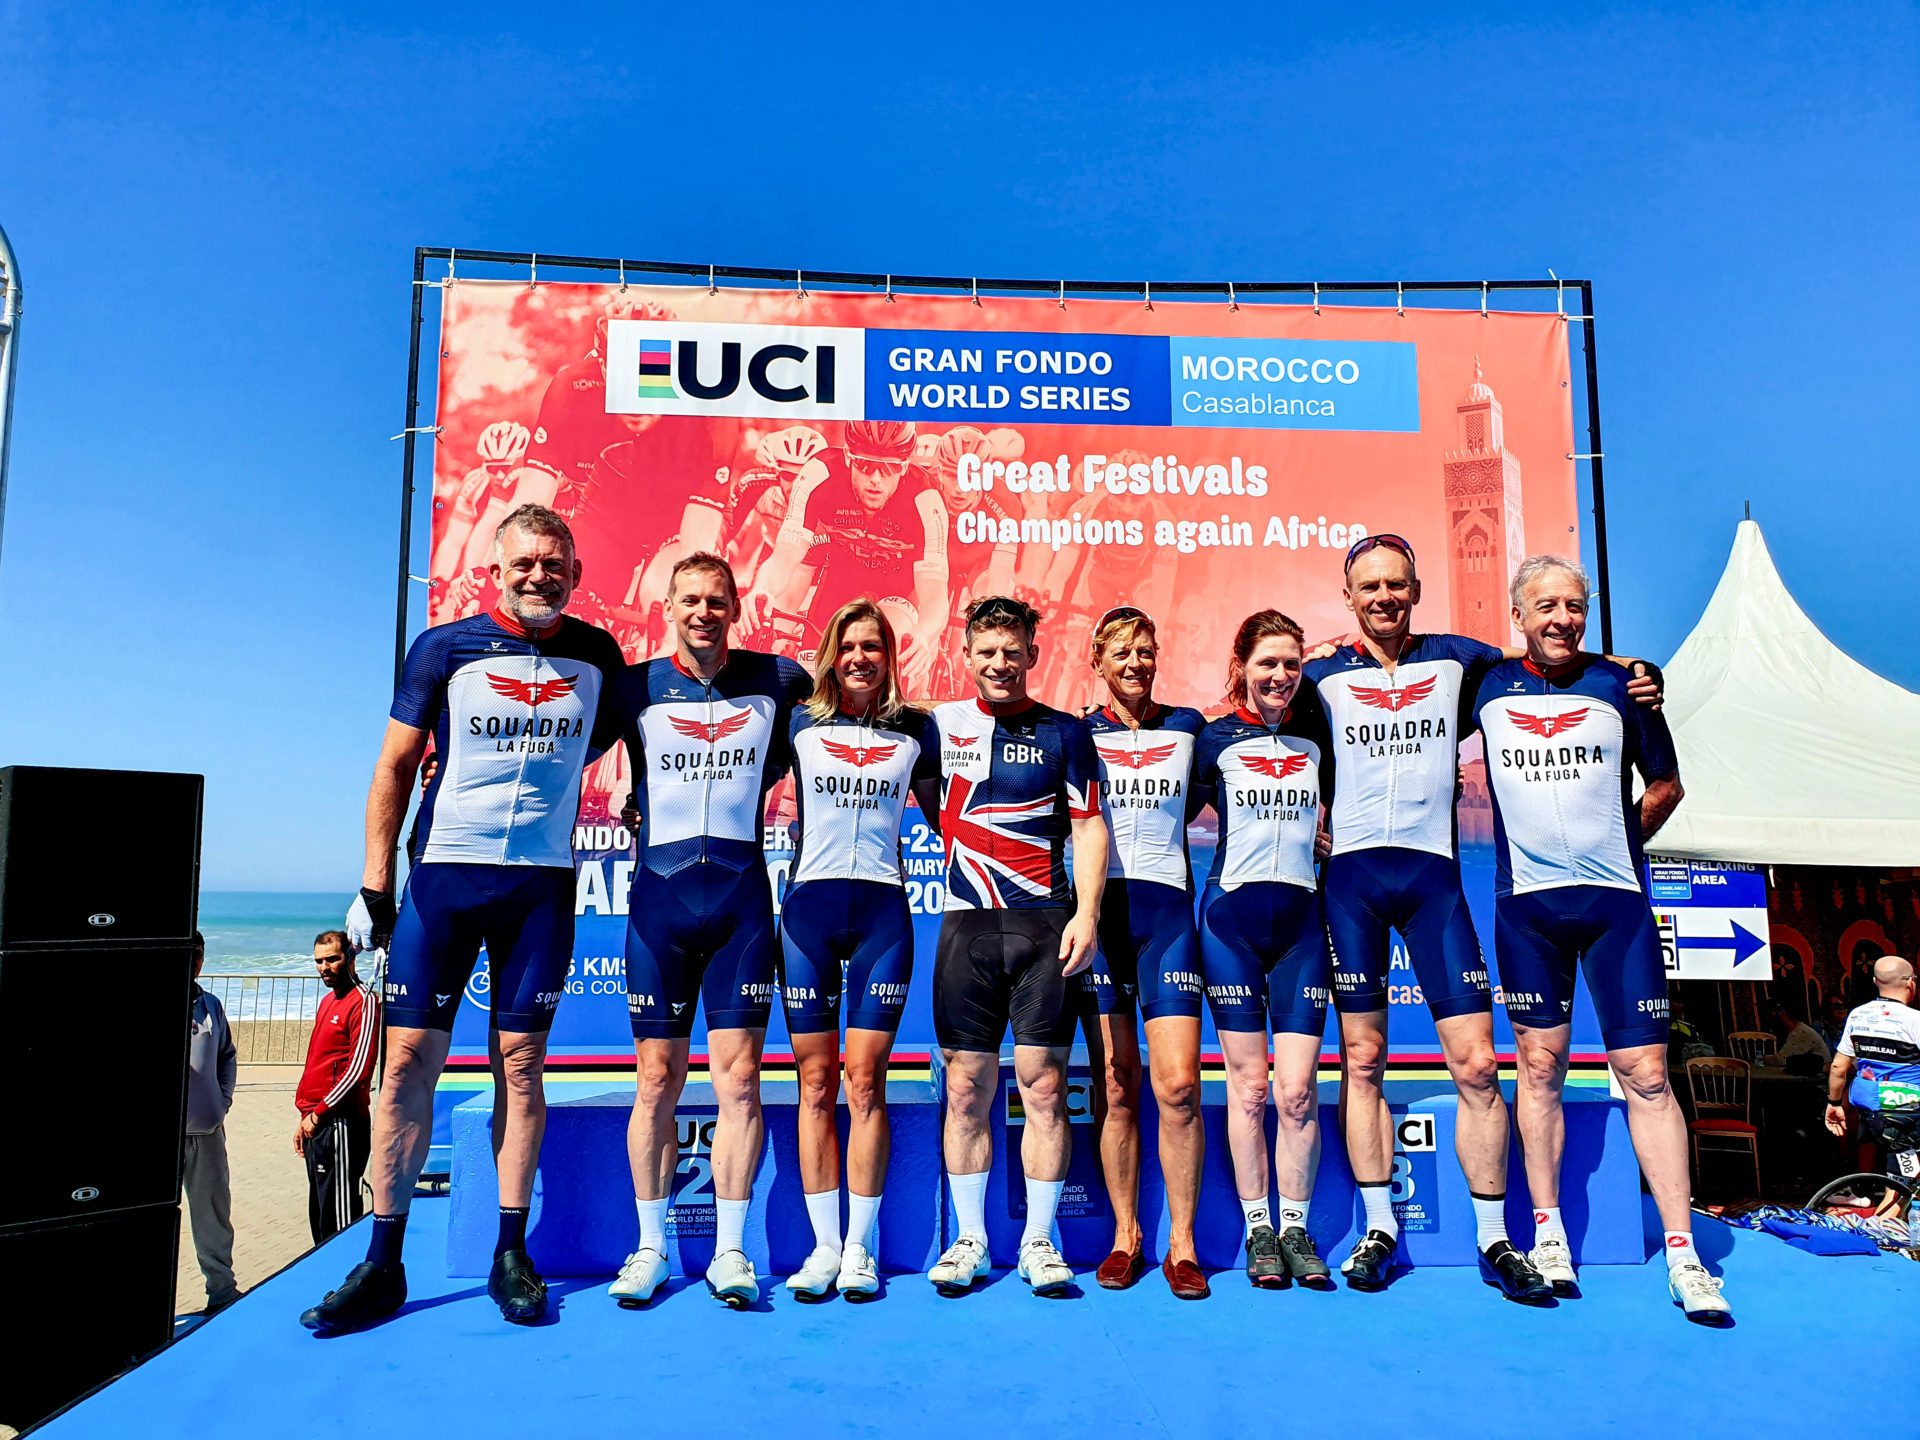 2023 Uci Gran Fondo World Championships Awarded To Glasgow Images and